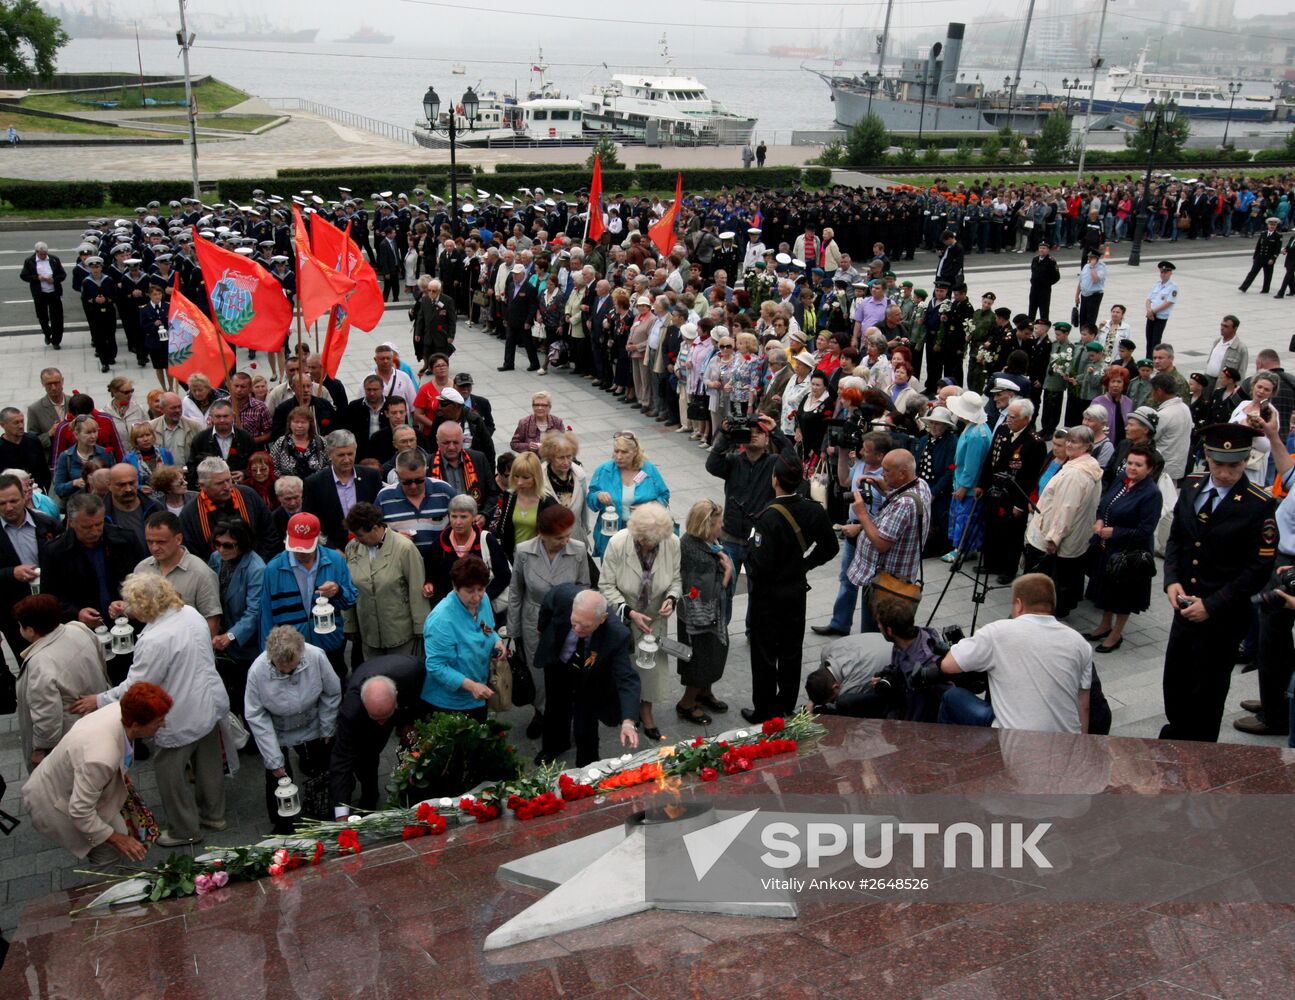 Russia hosts "Memorial Candle" event